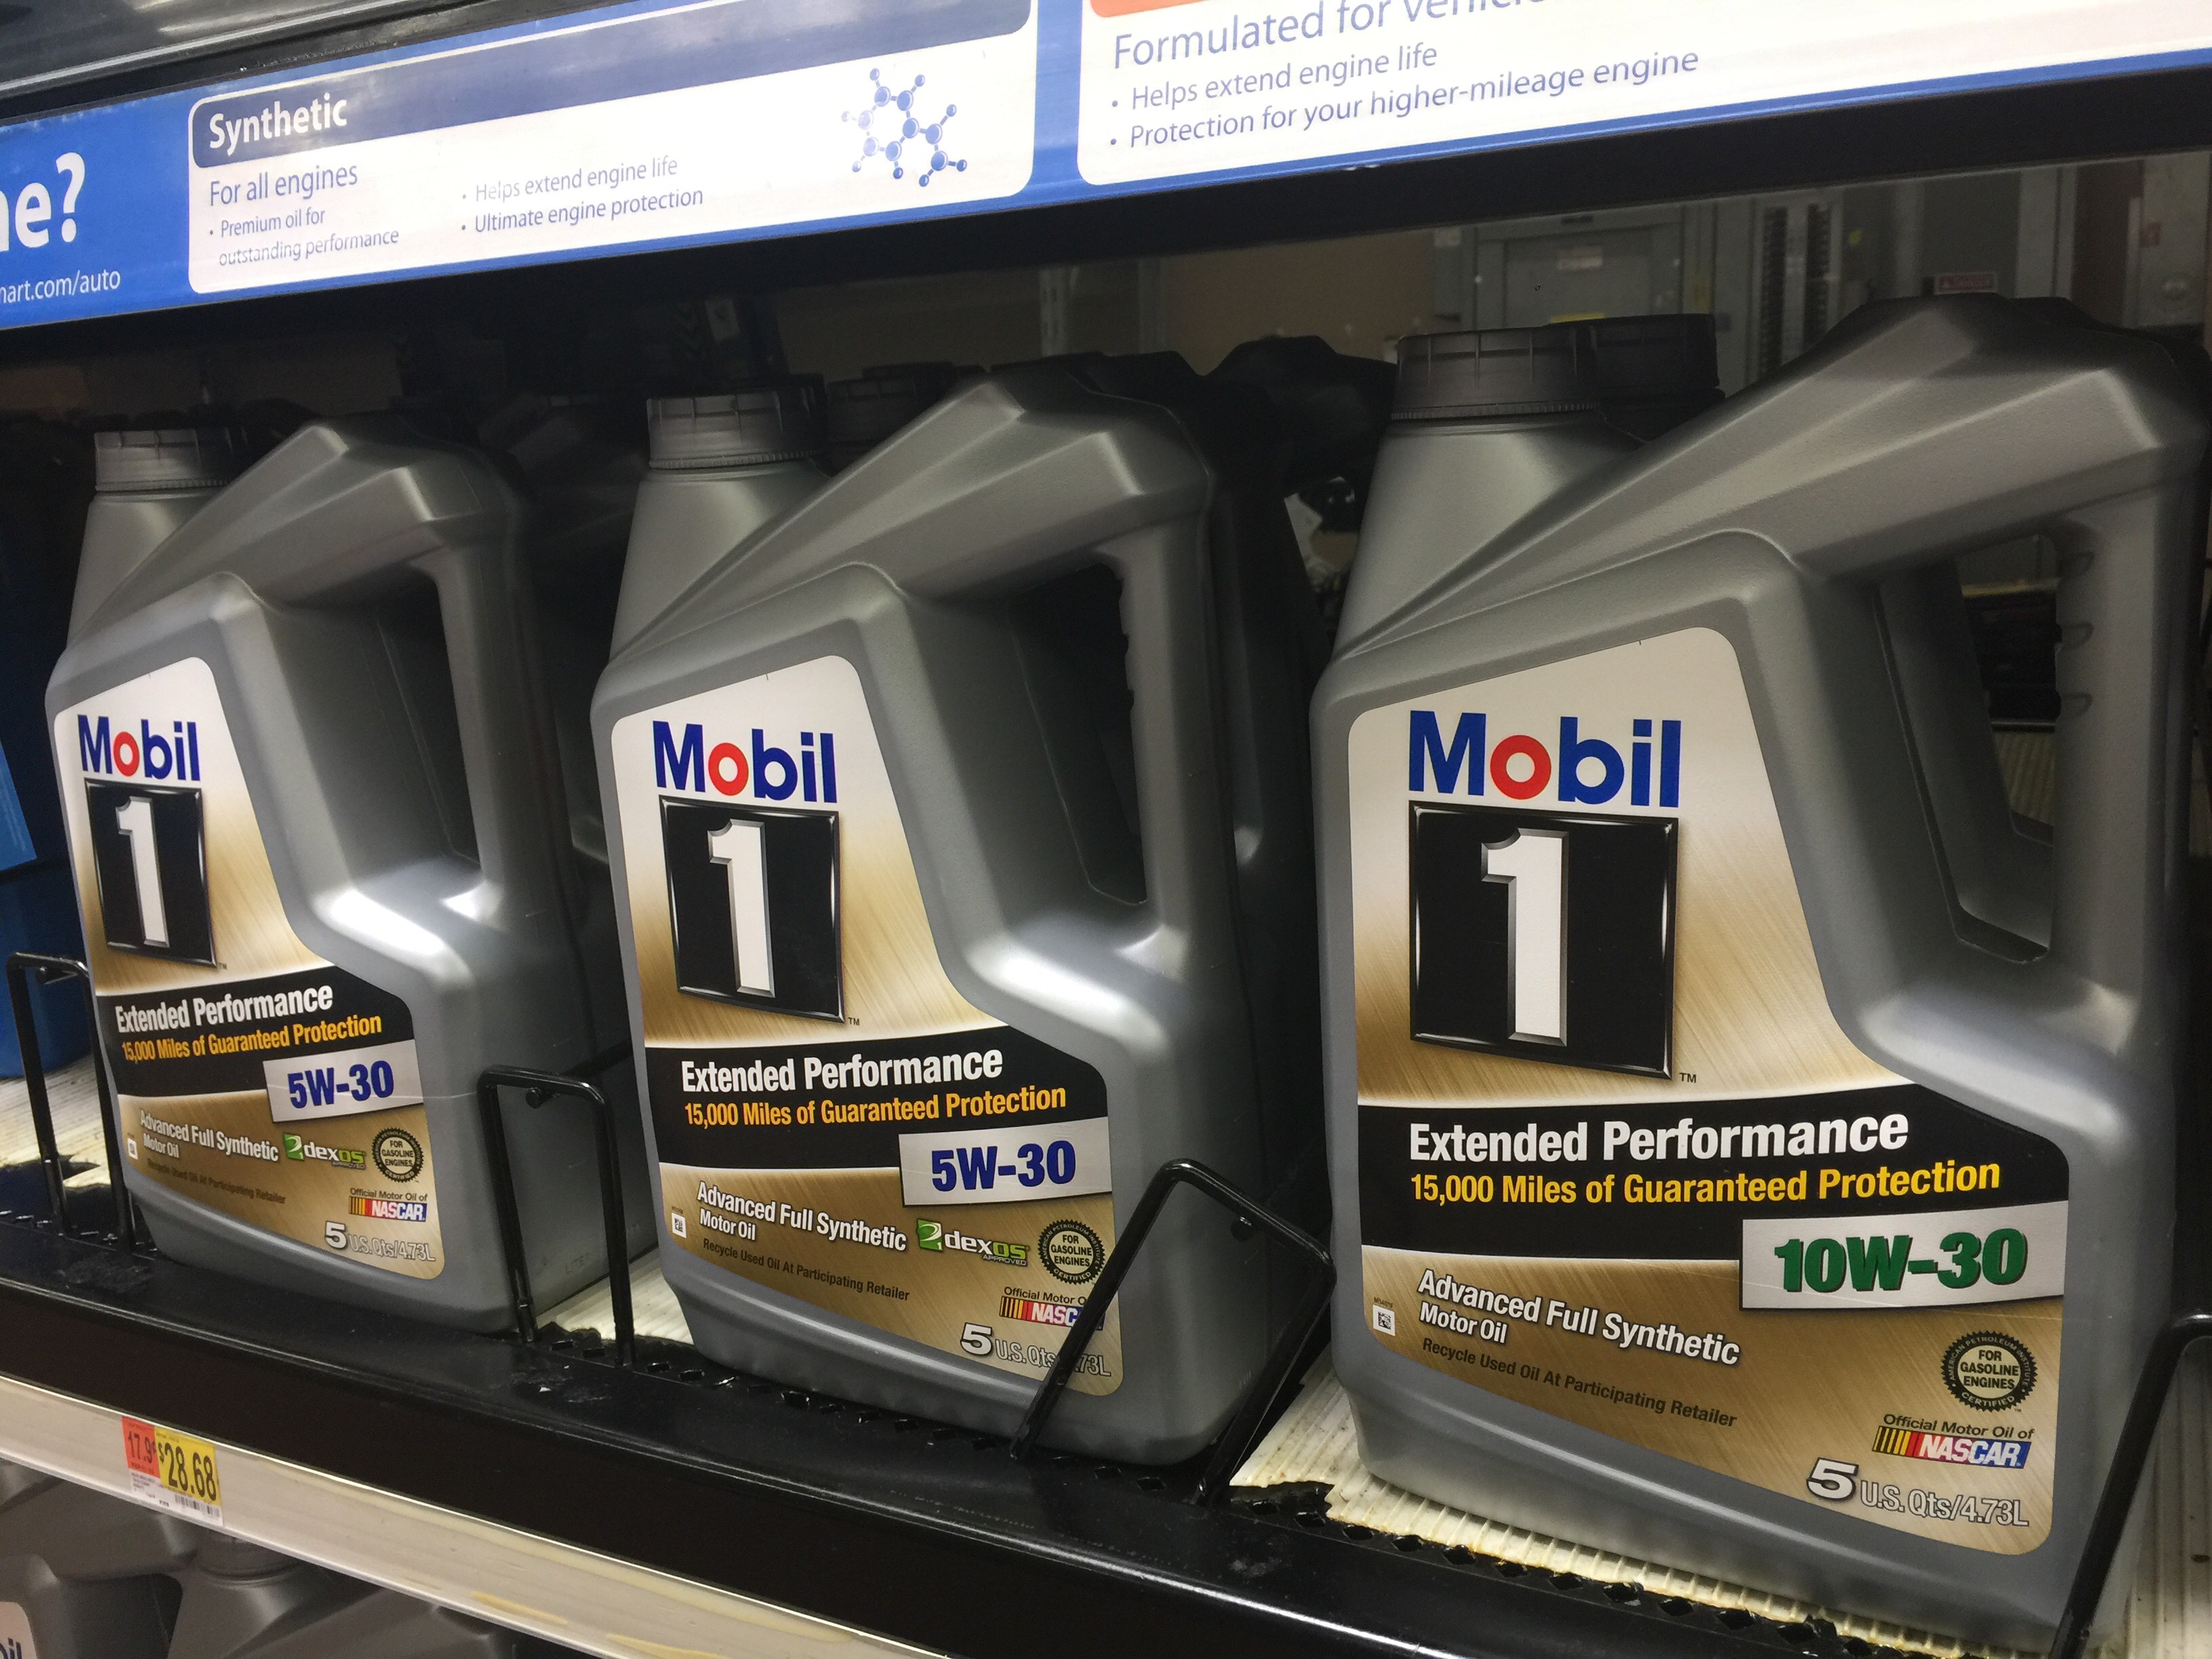 mobil-1-synthetic-5-quart-motor-oil-only-5-96-after-rebate-on-walmart